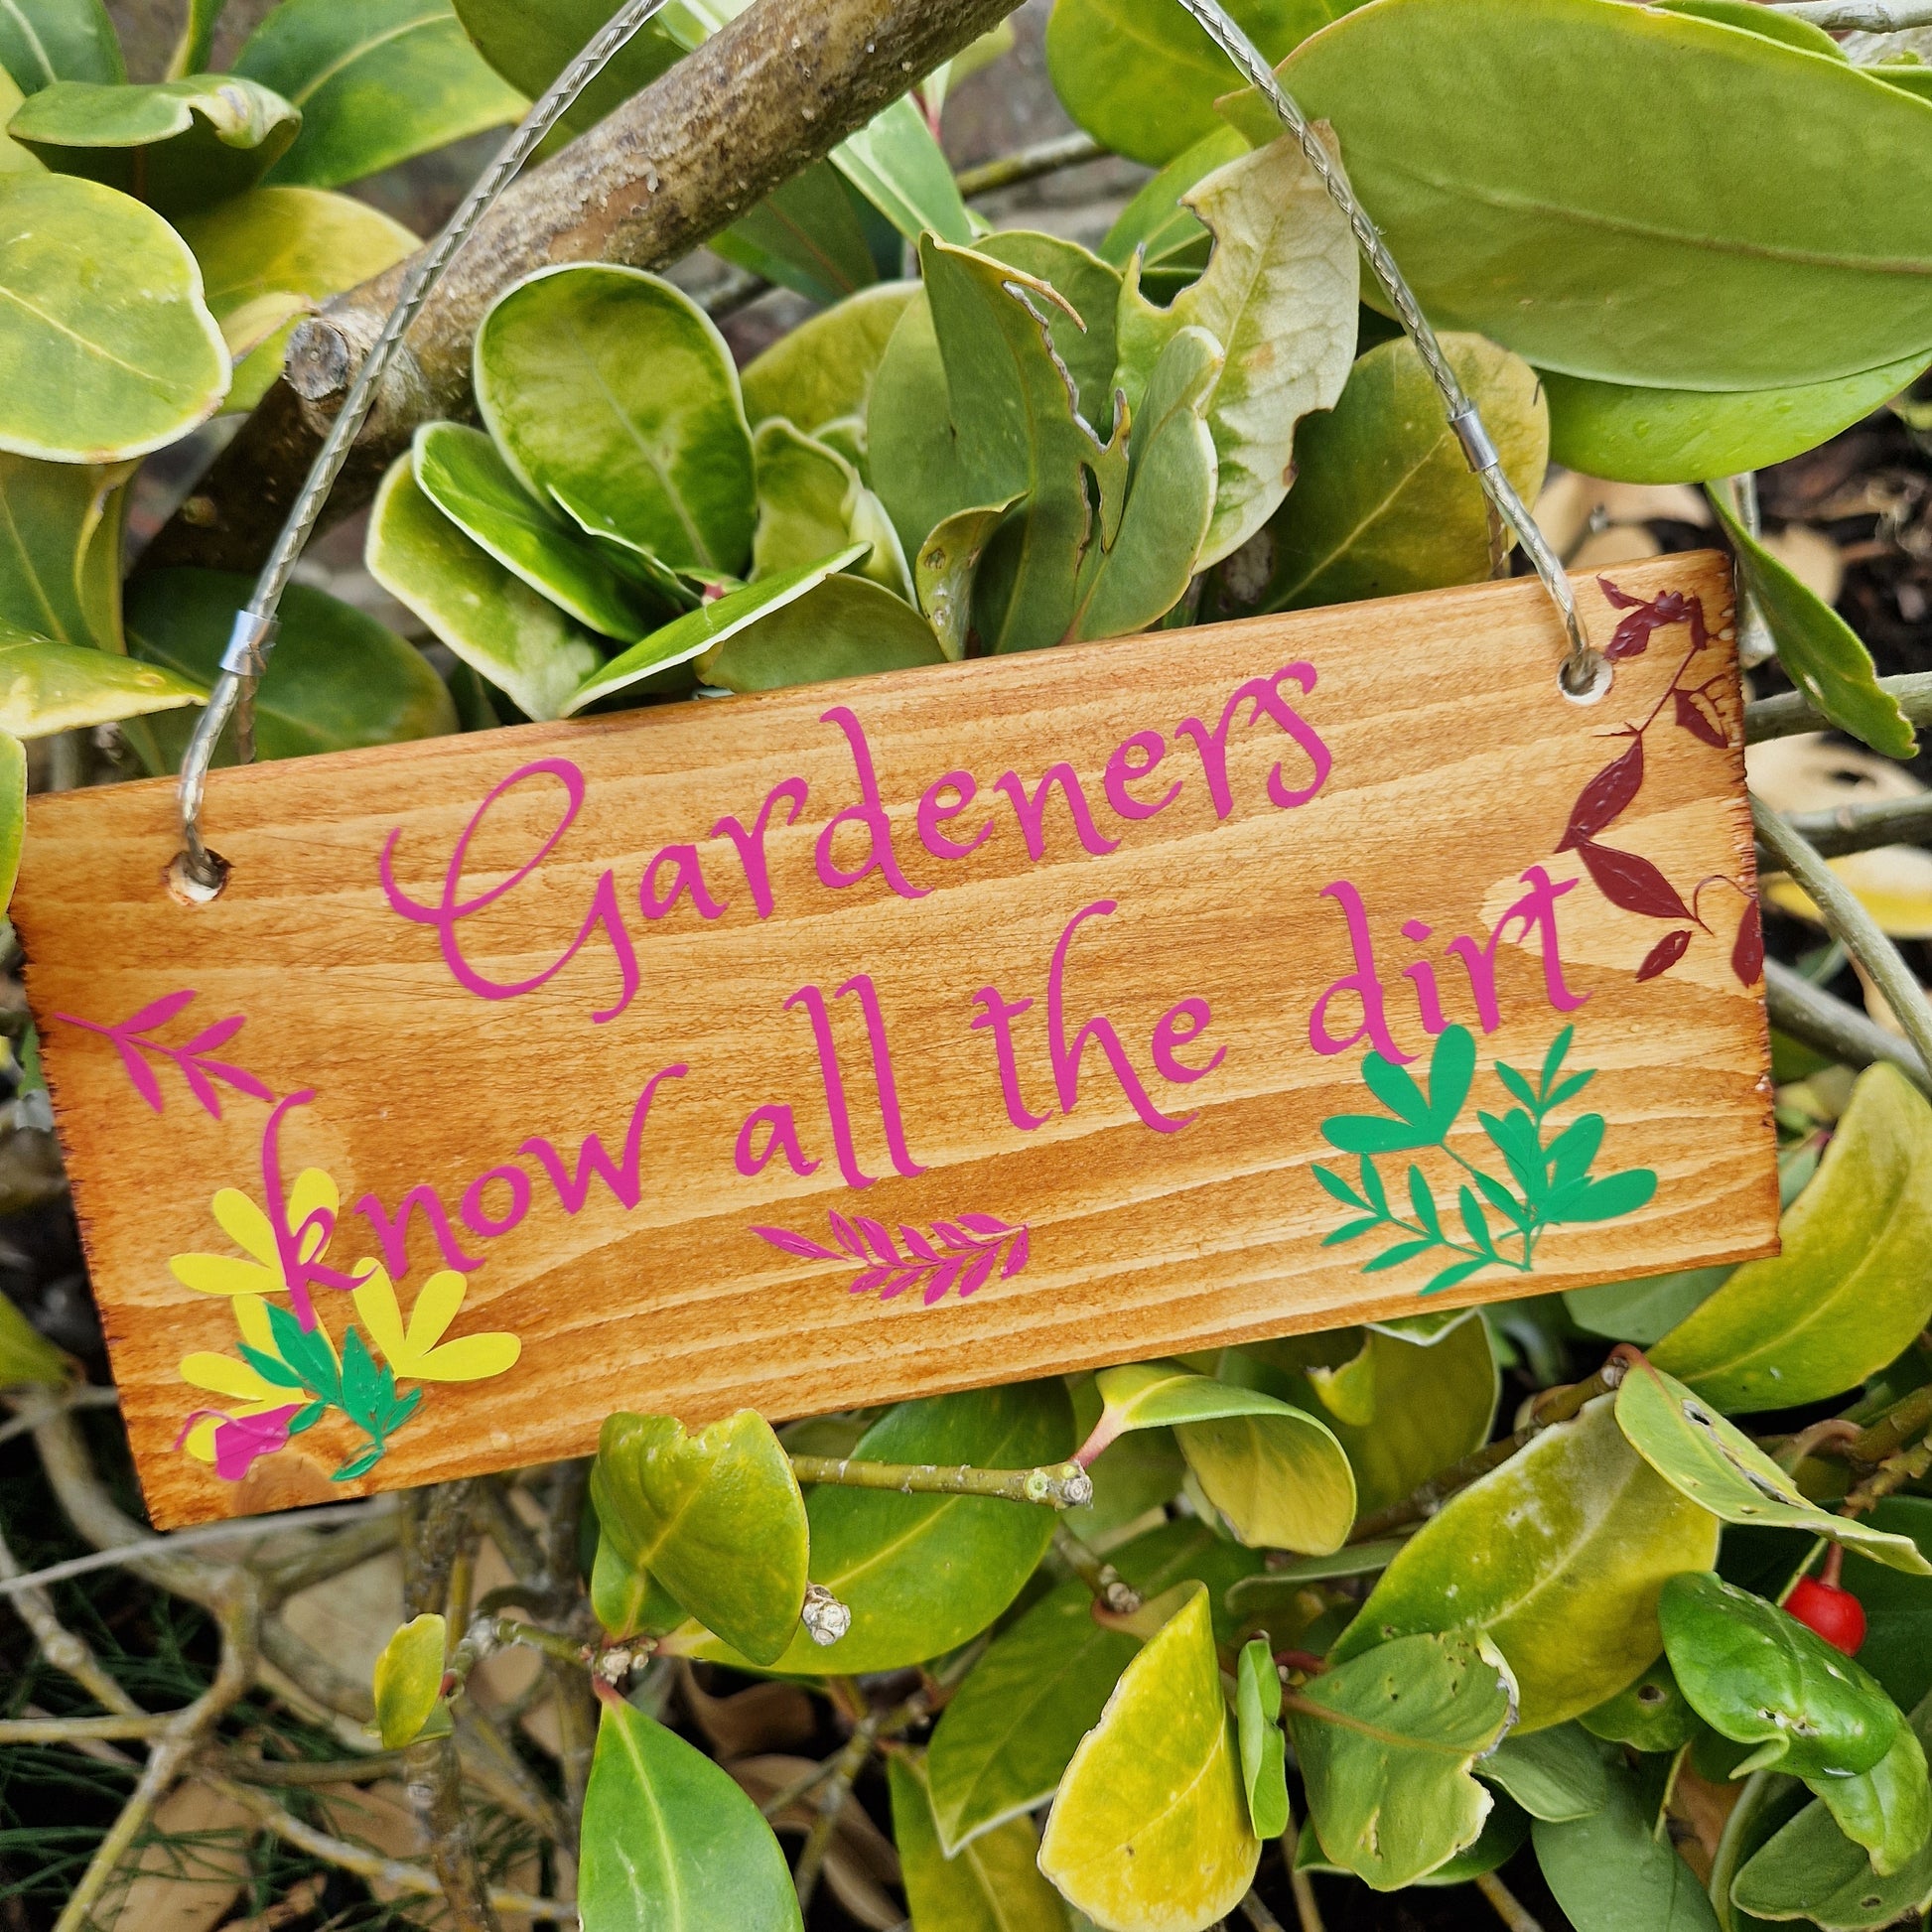 funny garden signs uk gardeners know all the dirt